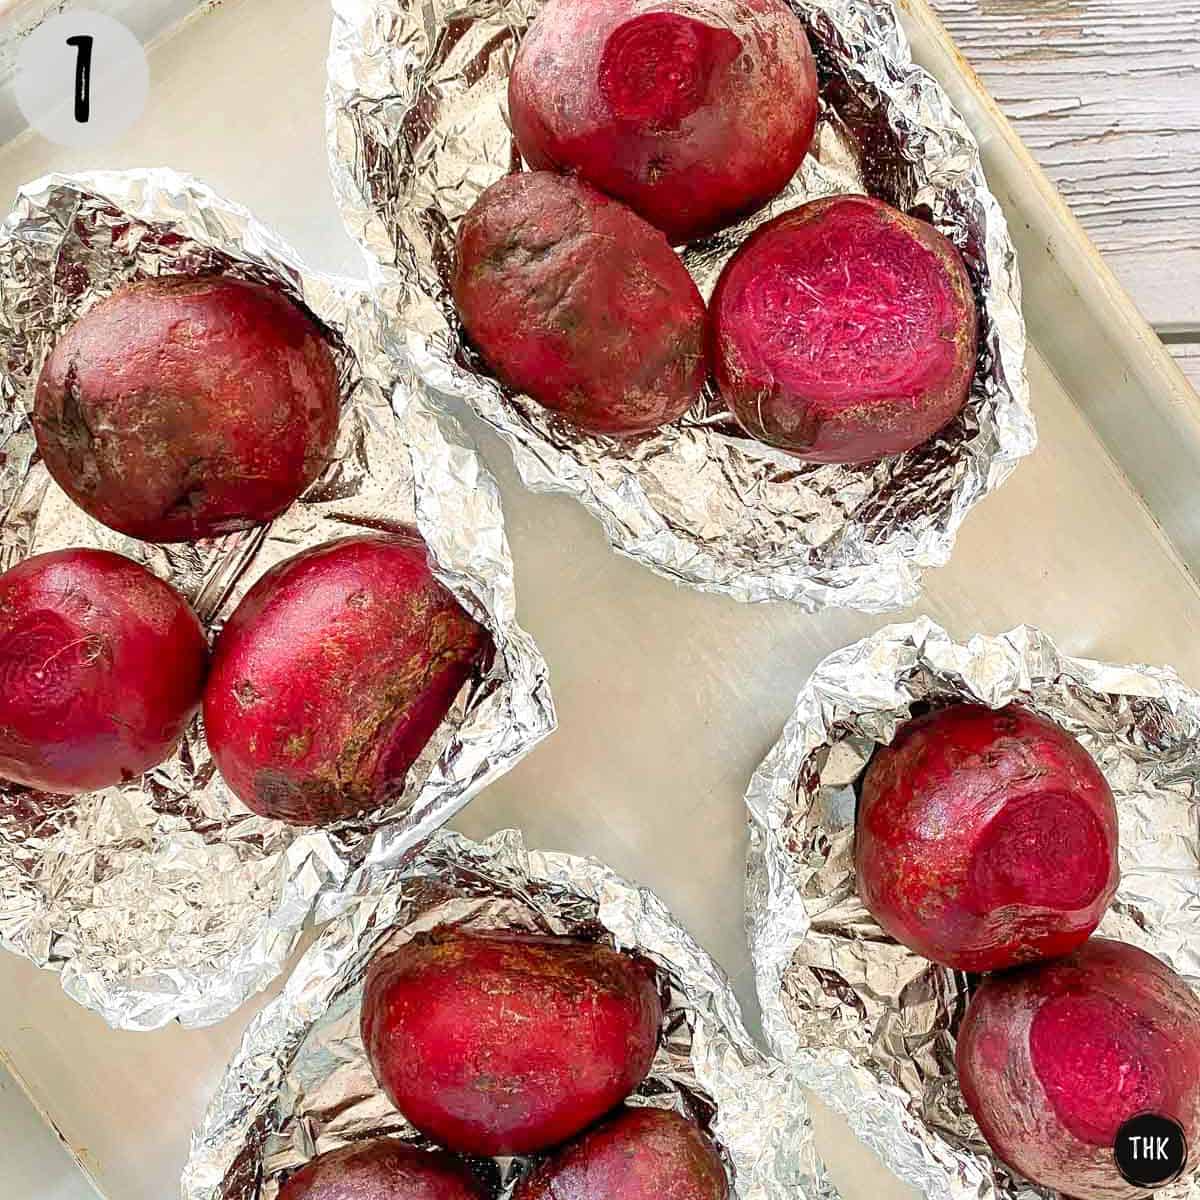 Beets with sliced top sitting in foil packets on baking sheet.